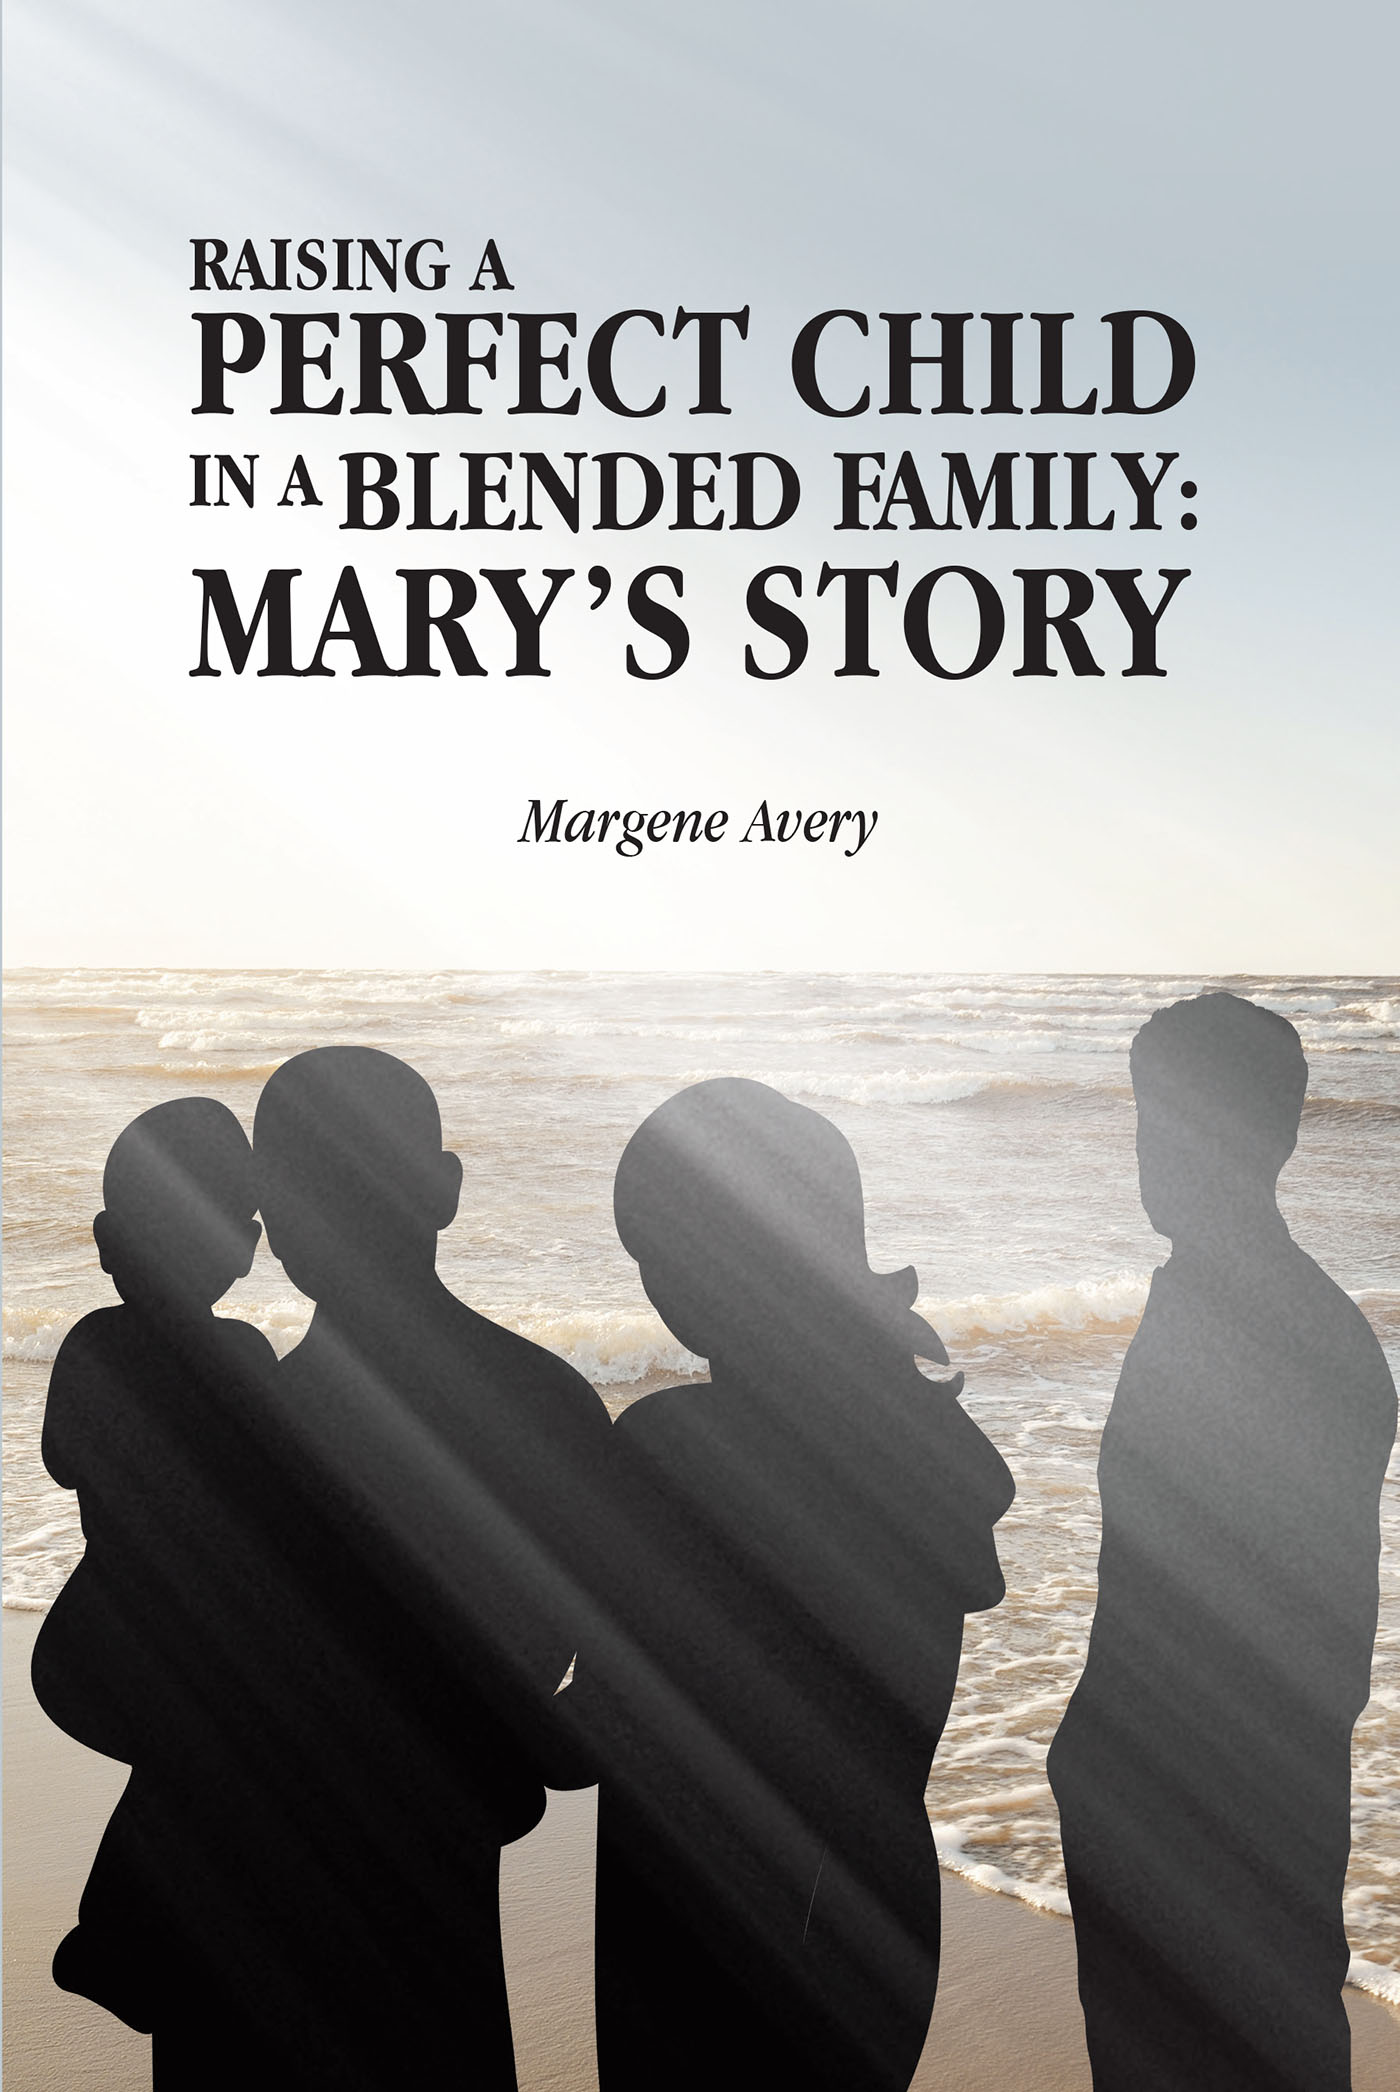 Margene Avery’s Newly Released "Raising a Perfect Child in a Blended Family: Mary’s Story" is a Compelling Fiction That Brings Readers Into Mary’s Home